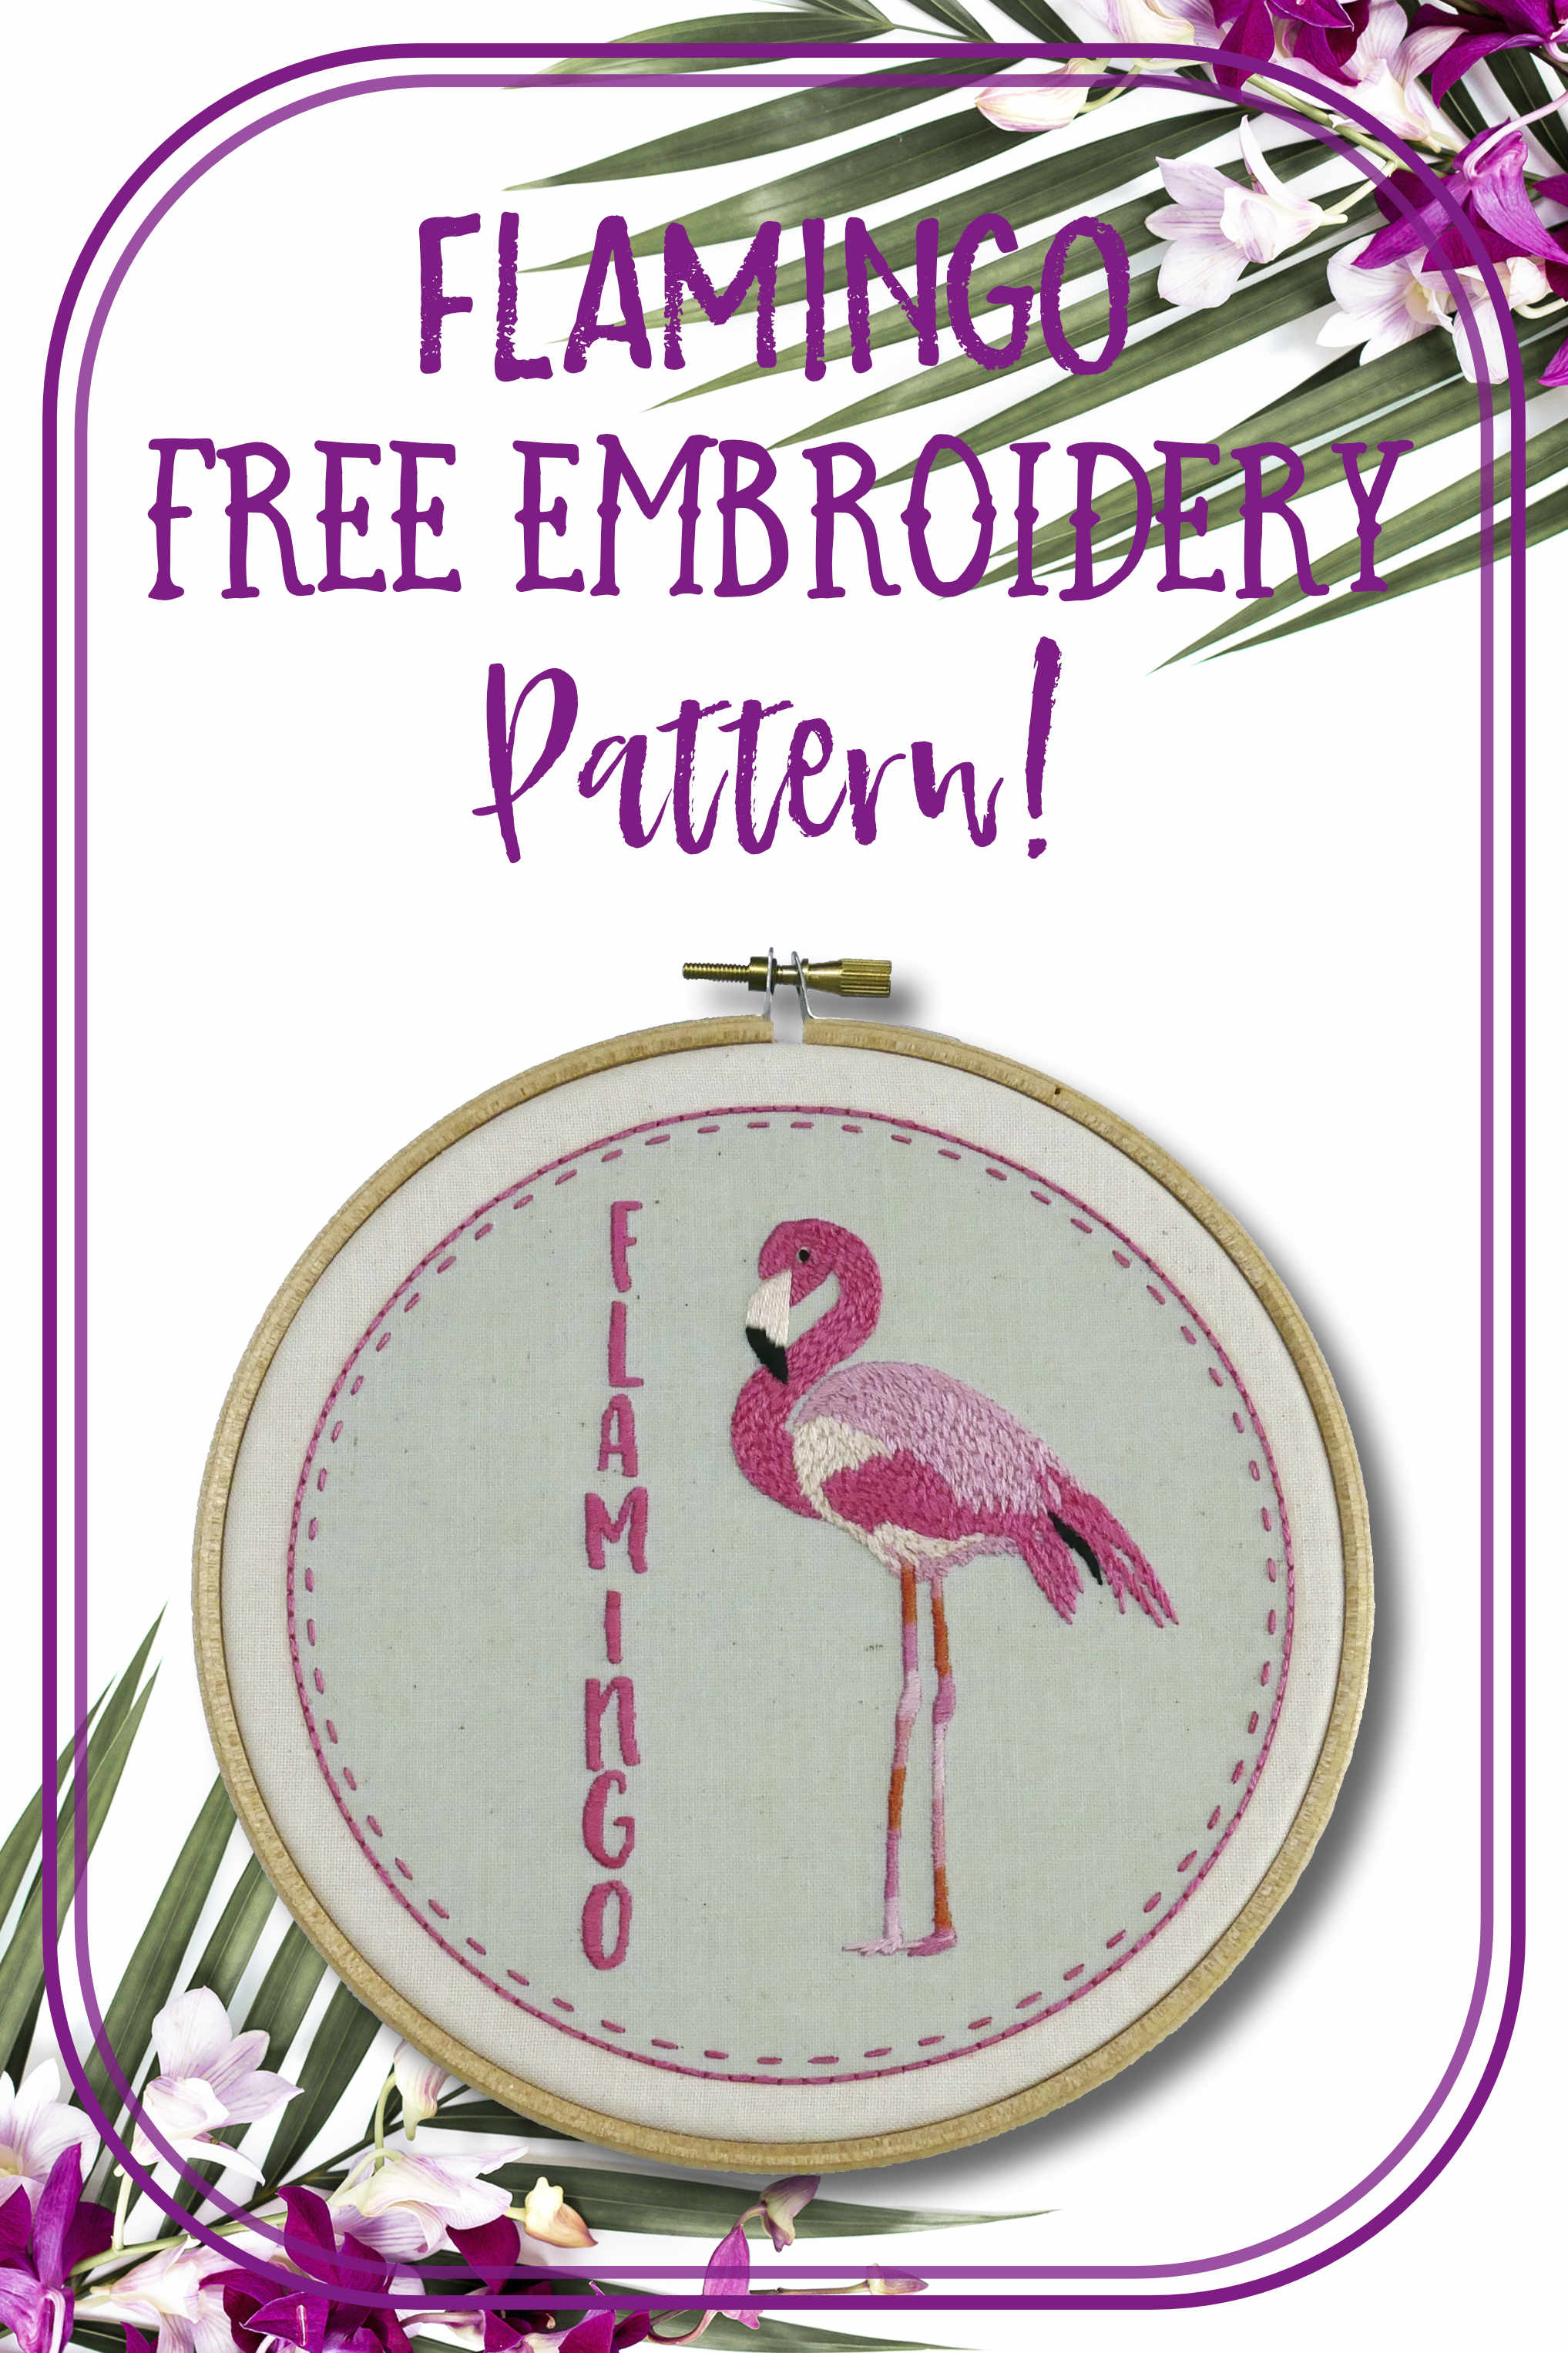 Free Embroidery Pattern Free Flamingo Embroidery Pattern Nog Pepper Me Craft Kit